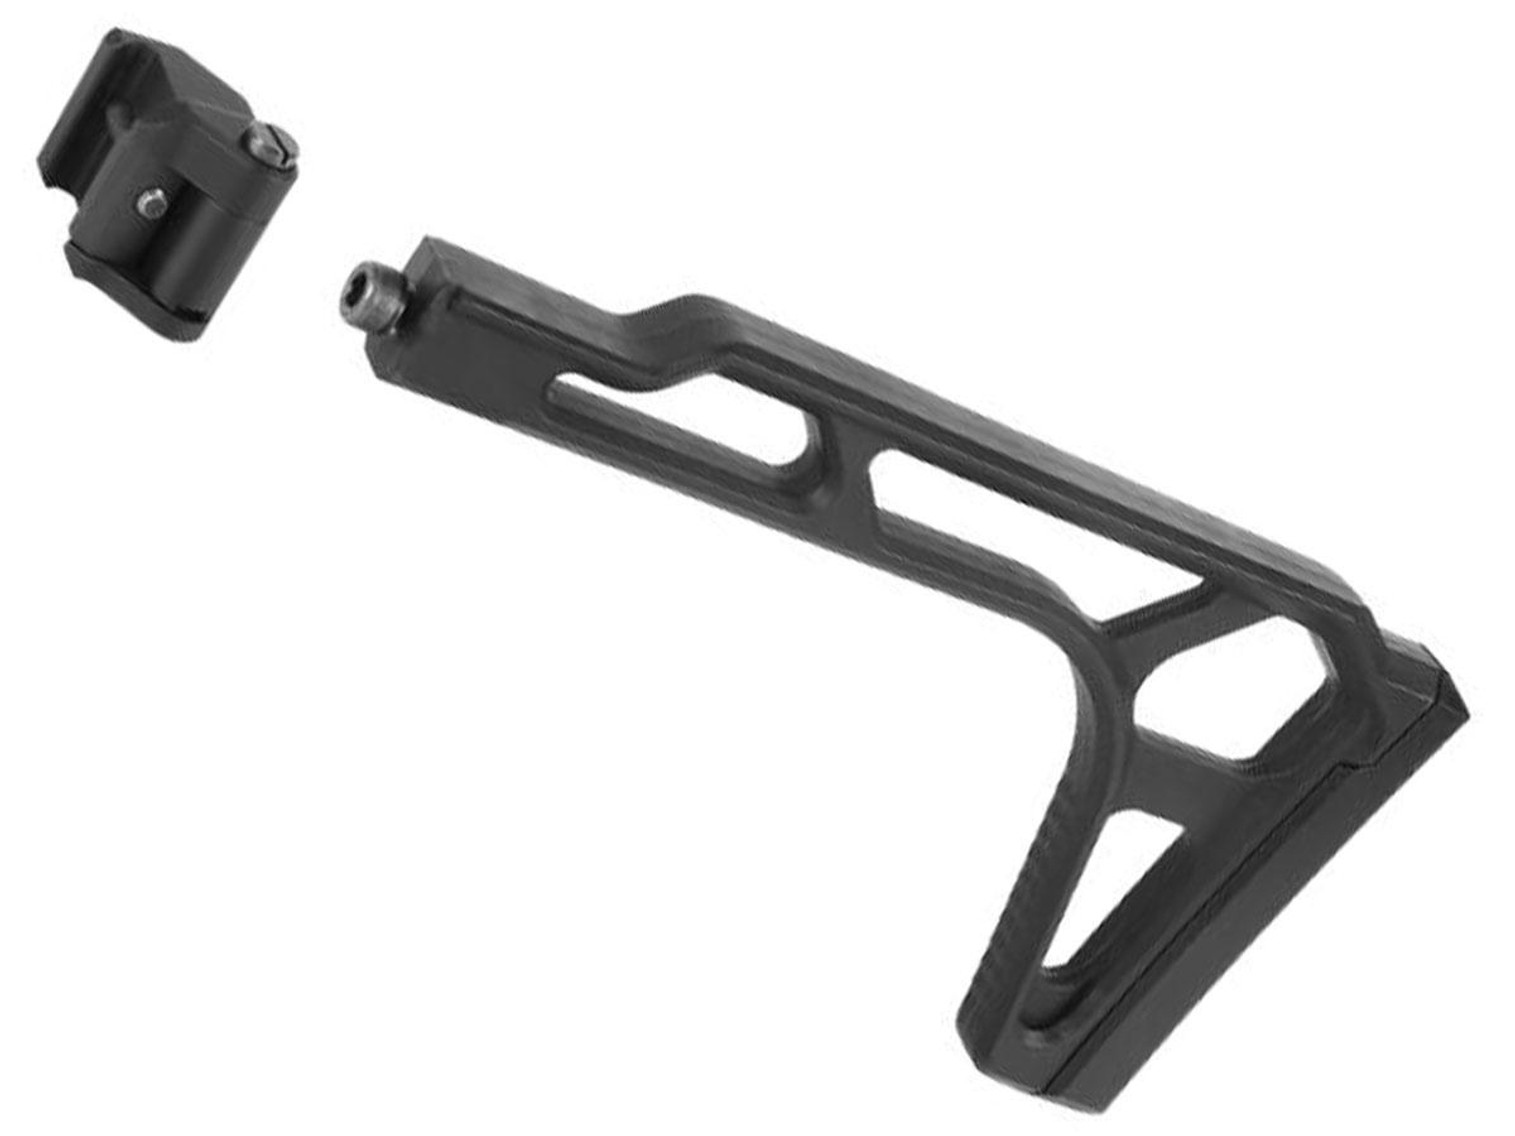 Laylax First Factory Lightweight Folding Stock for Picatinny Rail Mounts